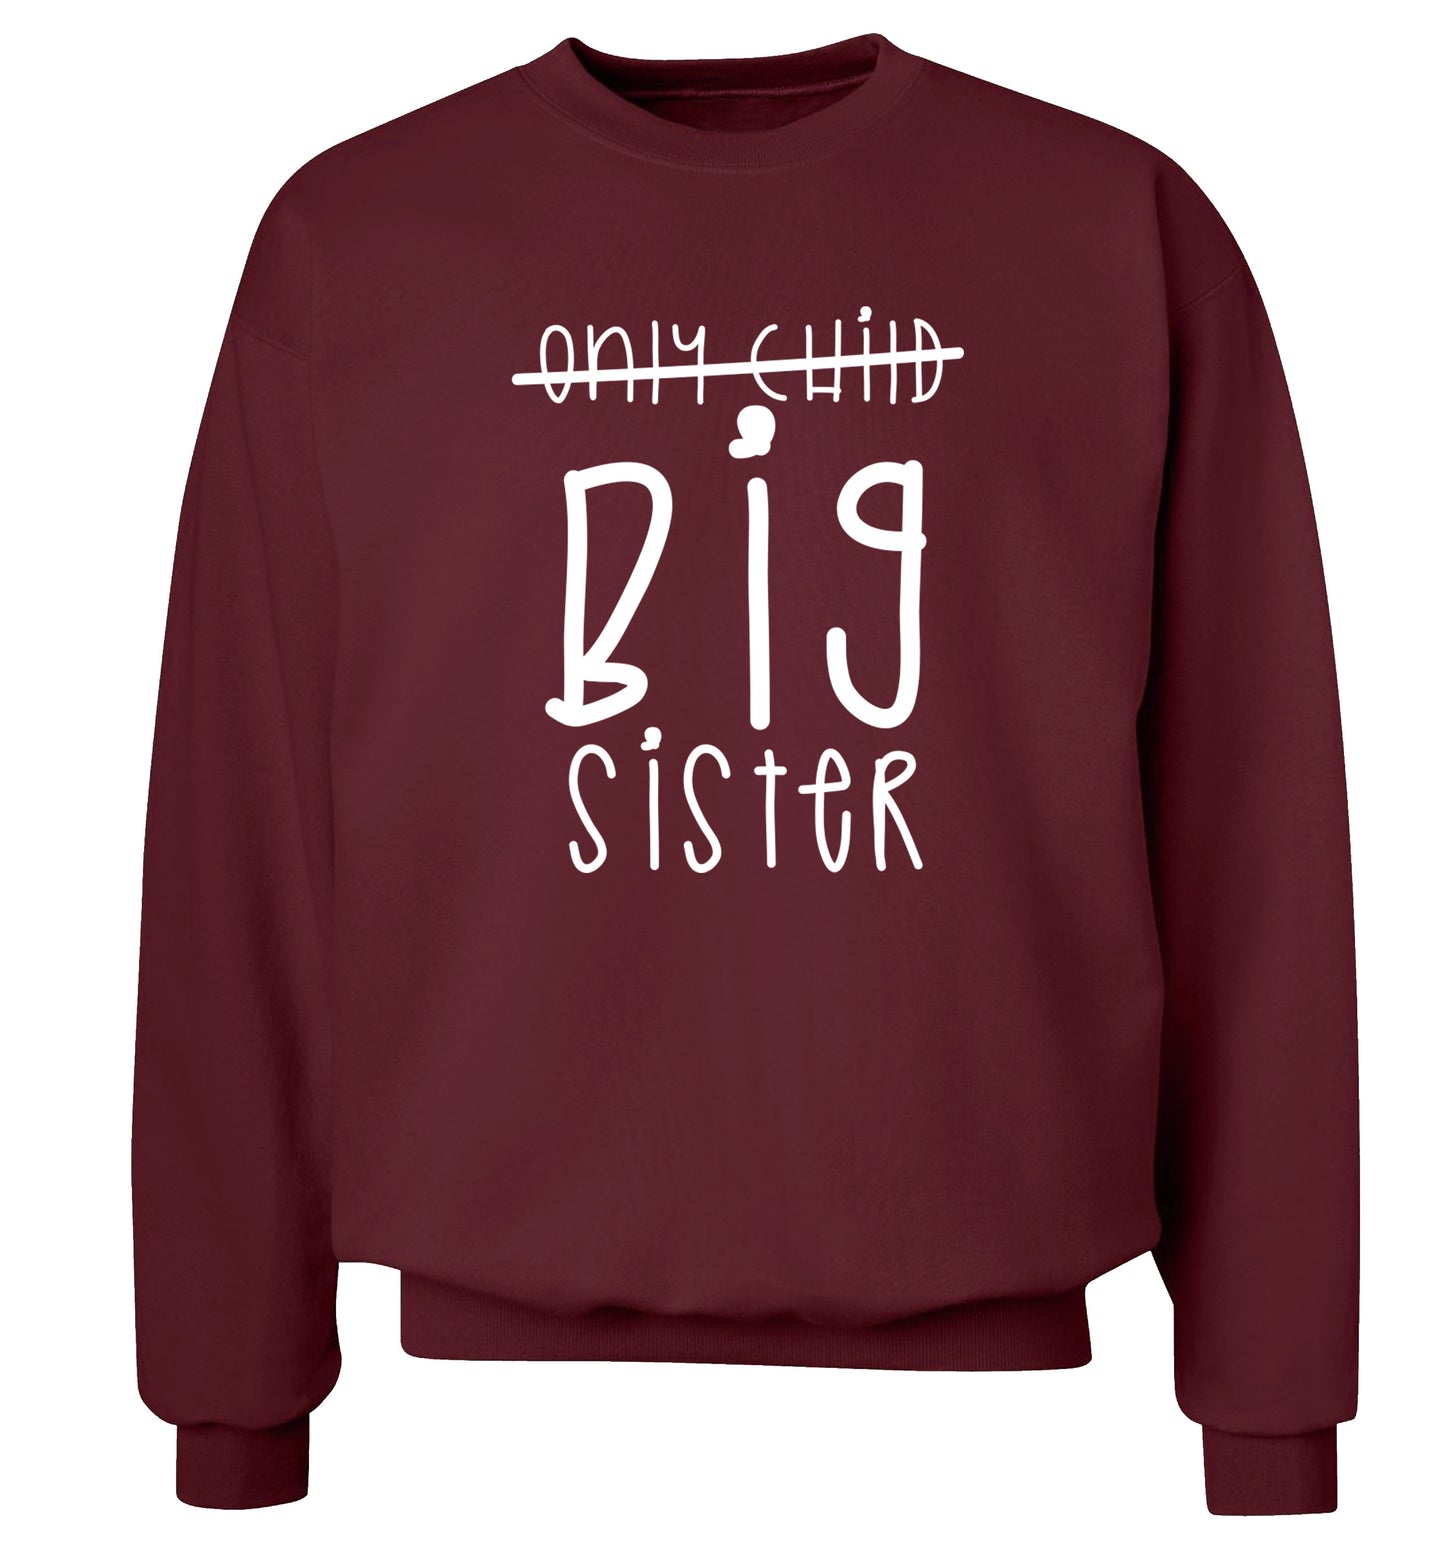 Only child big sister Adult's unisex maroon Sweater 2XL